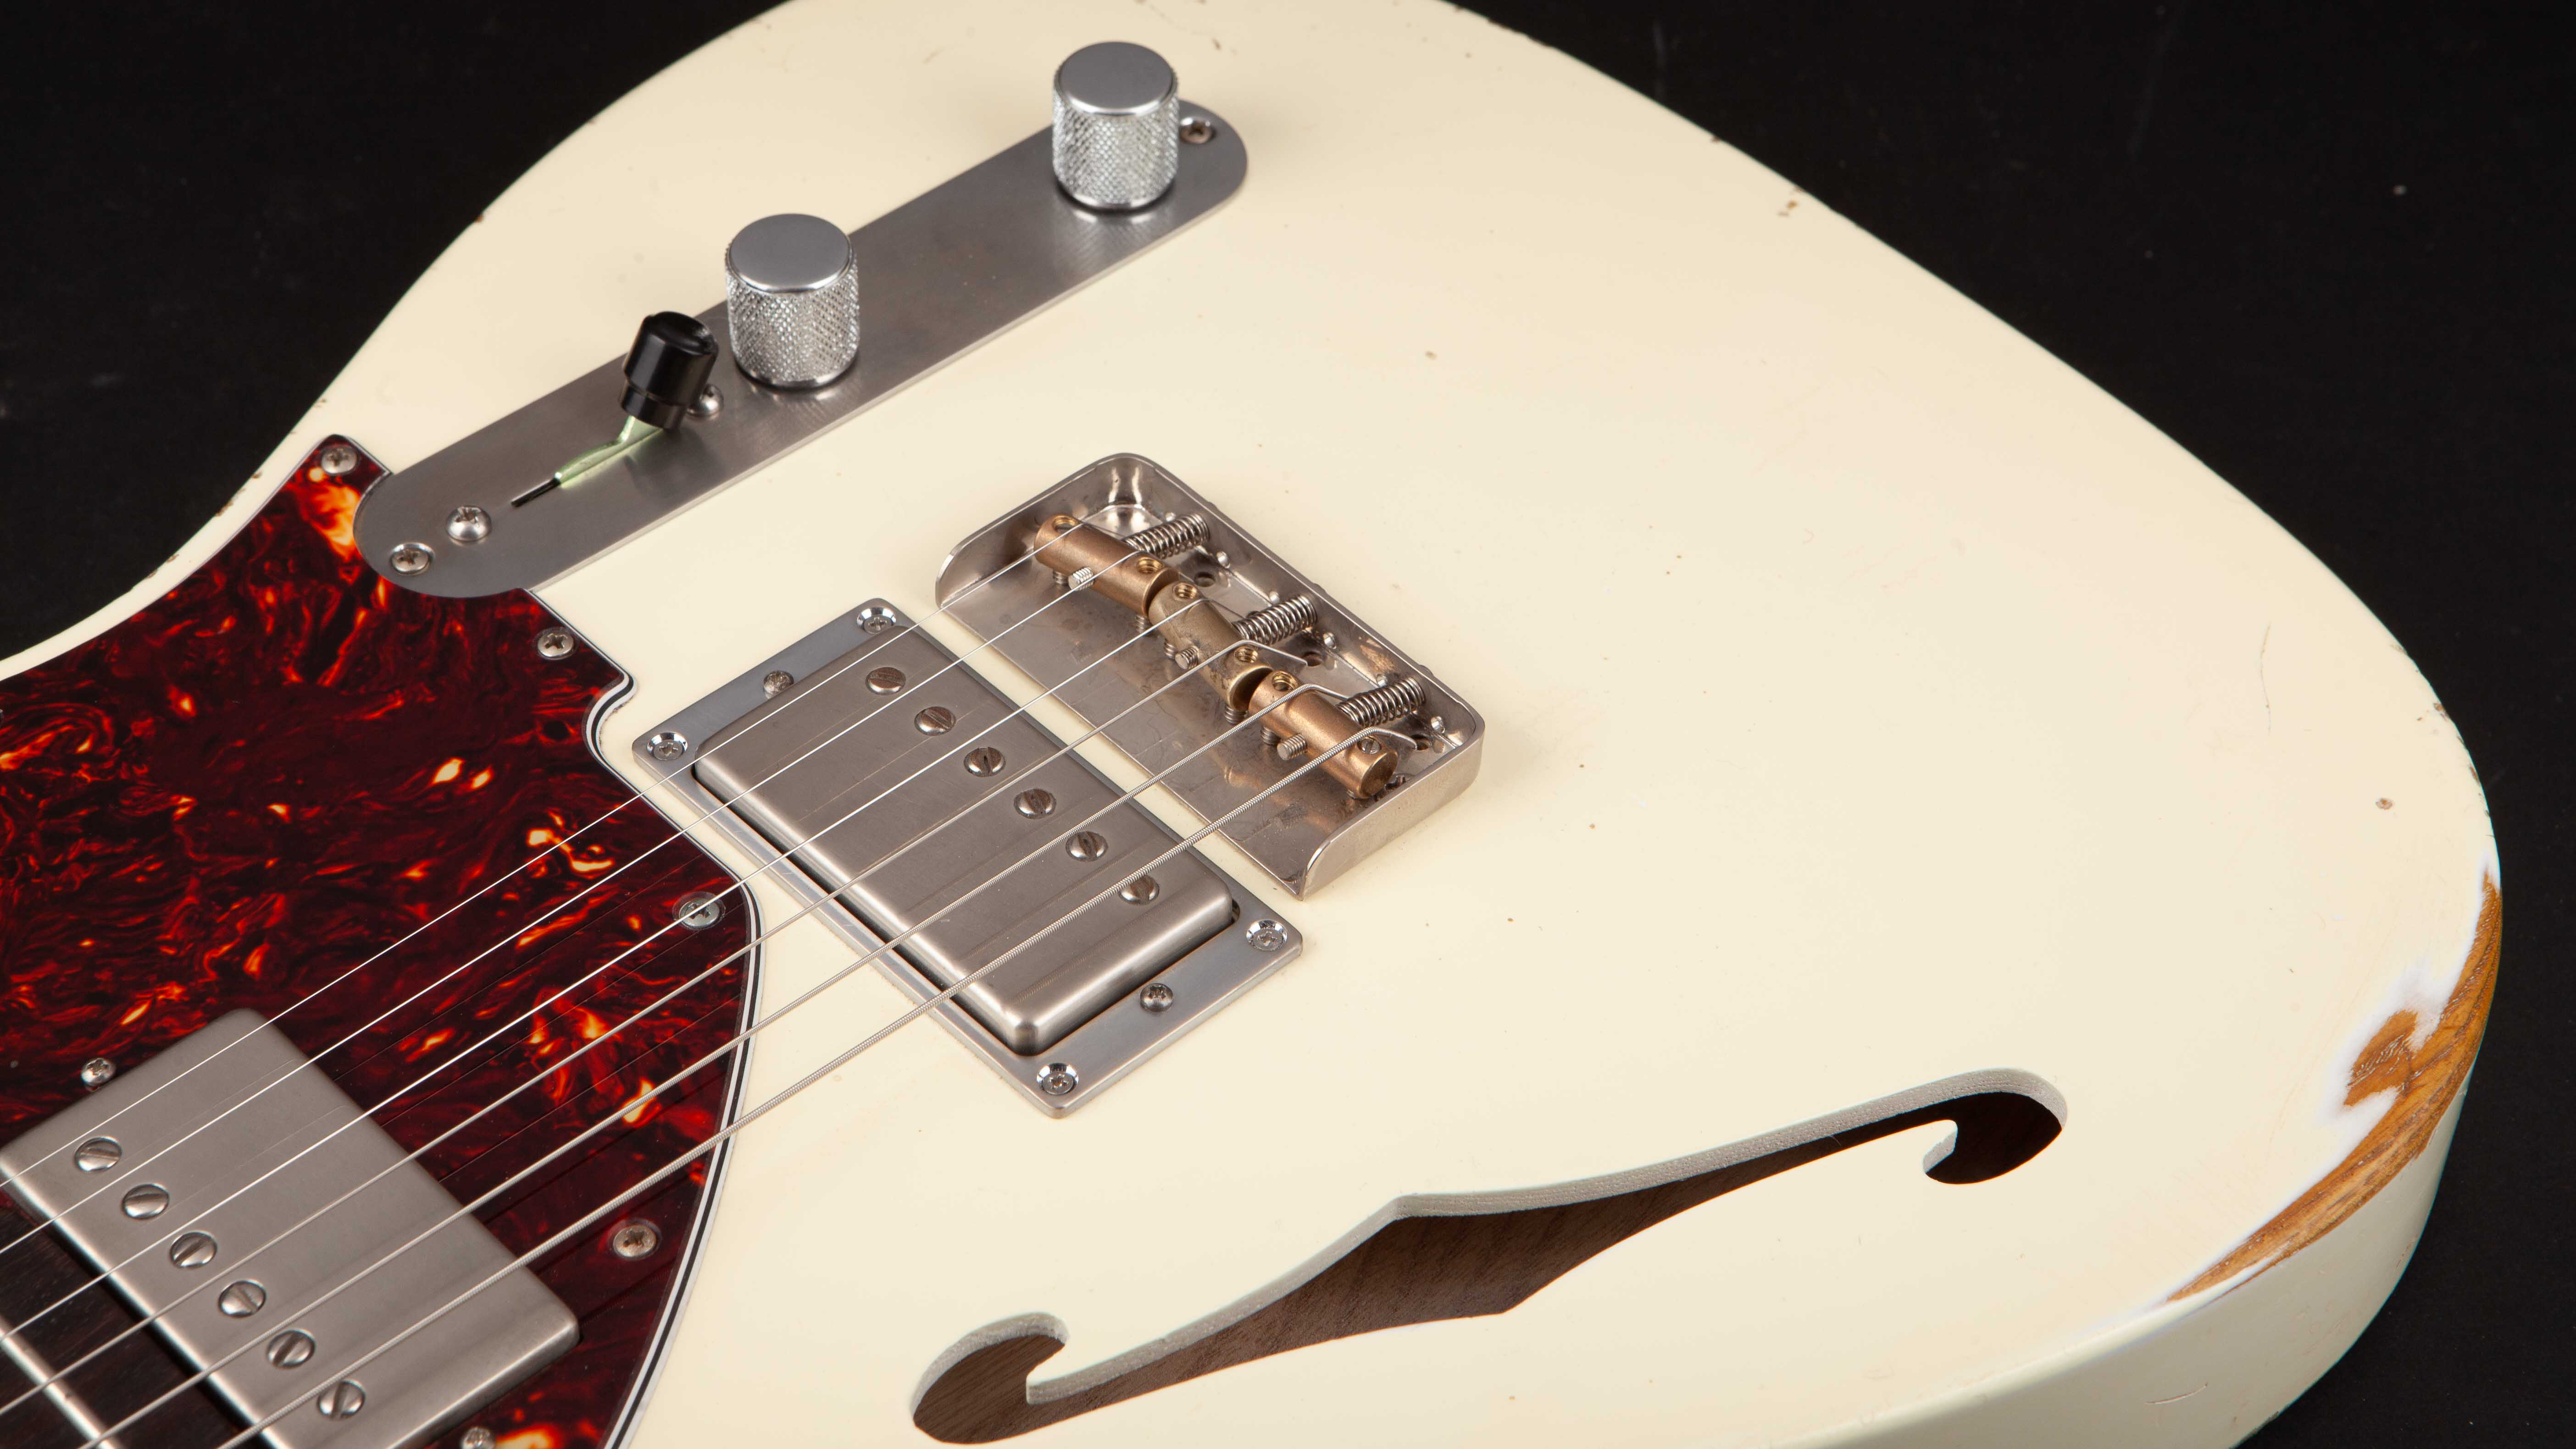 Smitty Guitars: T Style Thinline Olympic White with Mastergrade Roasted Flame Maple Neck